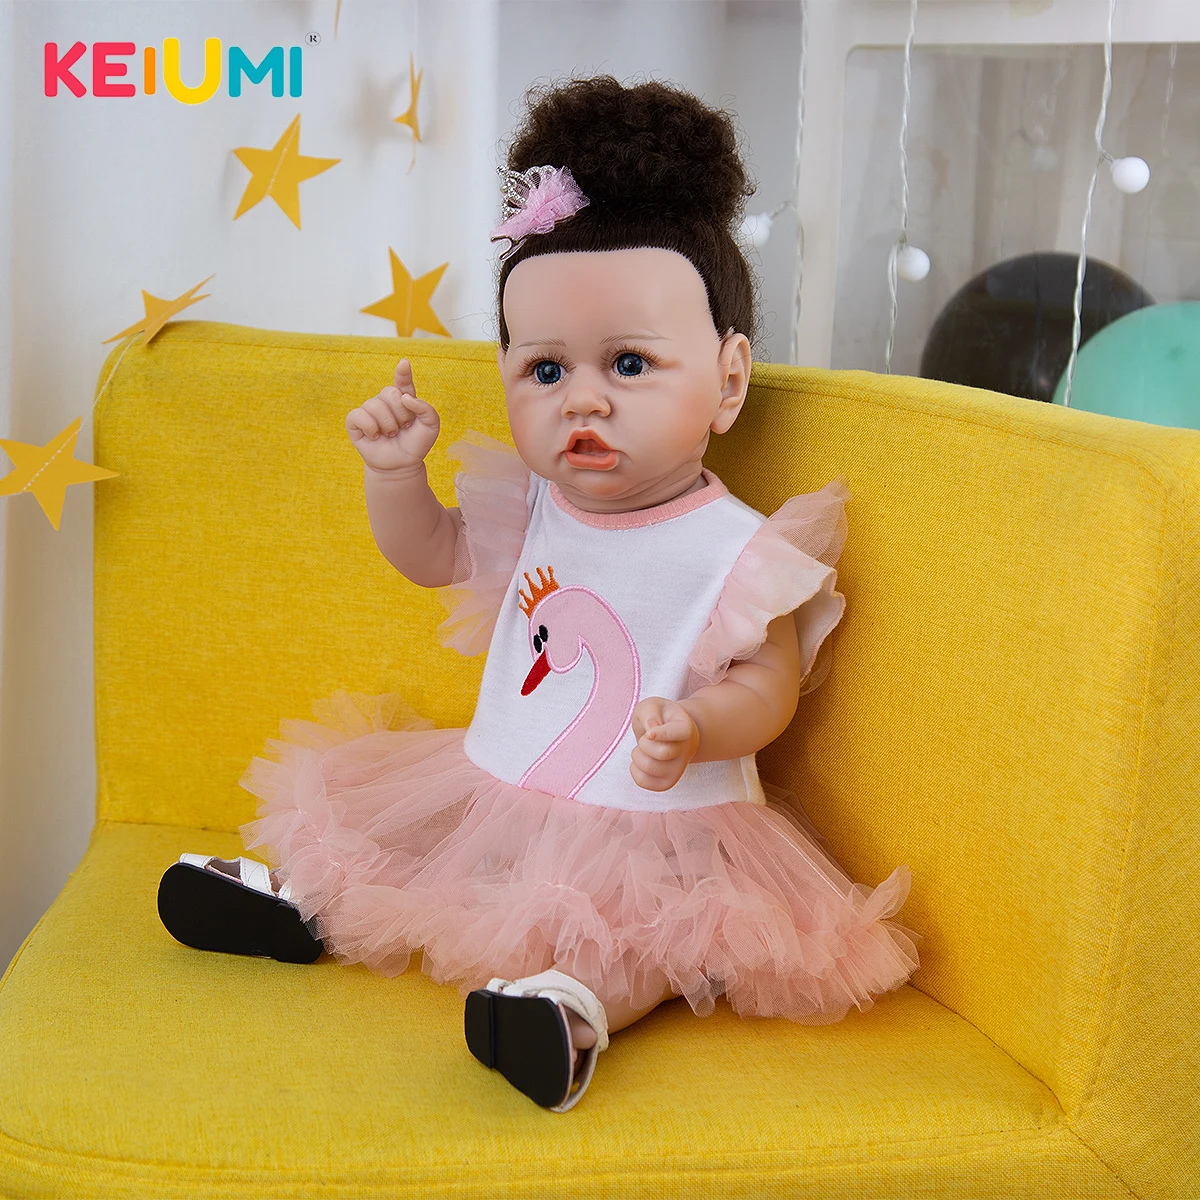 

KEIUMI 19 Inch Bebe Doll Reborn Toddler Girl Real Baby Dolls That Look Real Full Body Silicone Beautiful Doll Toy Gifts